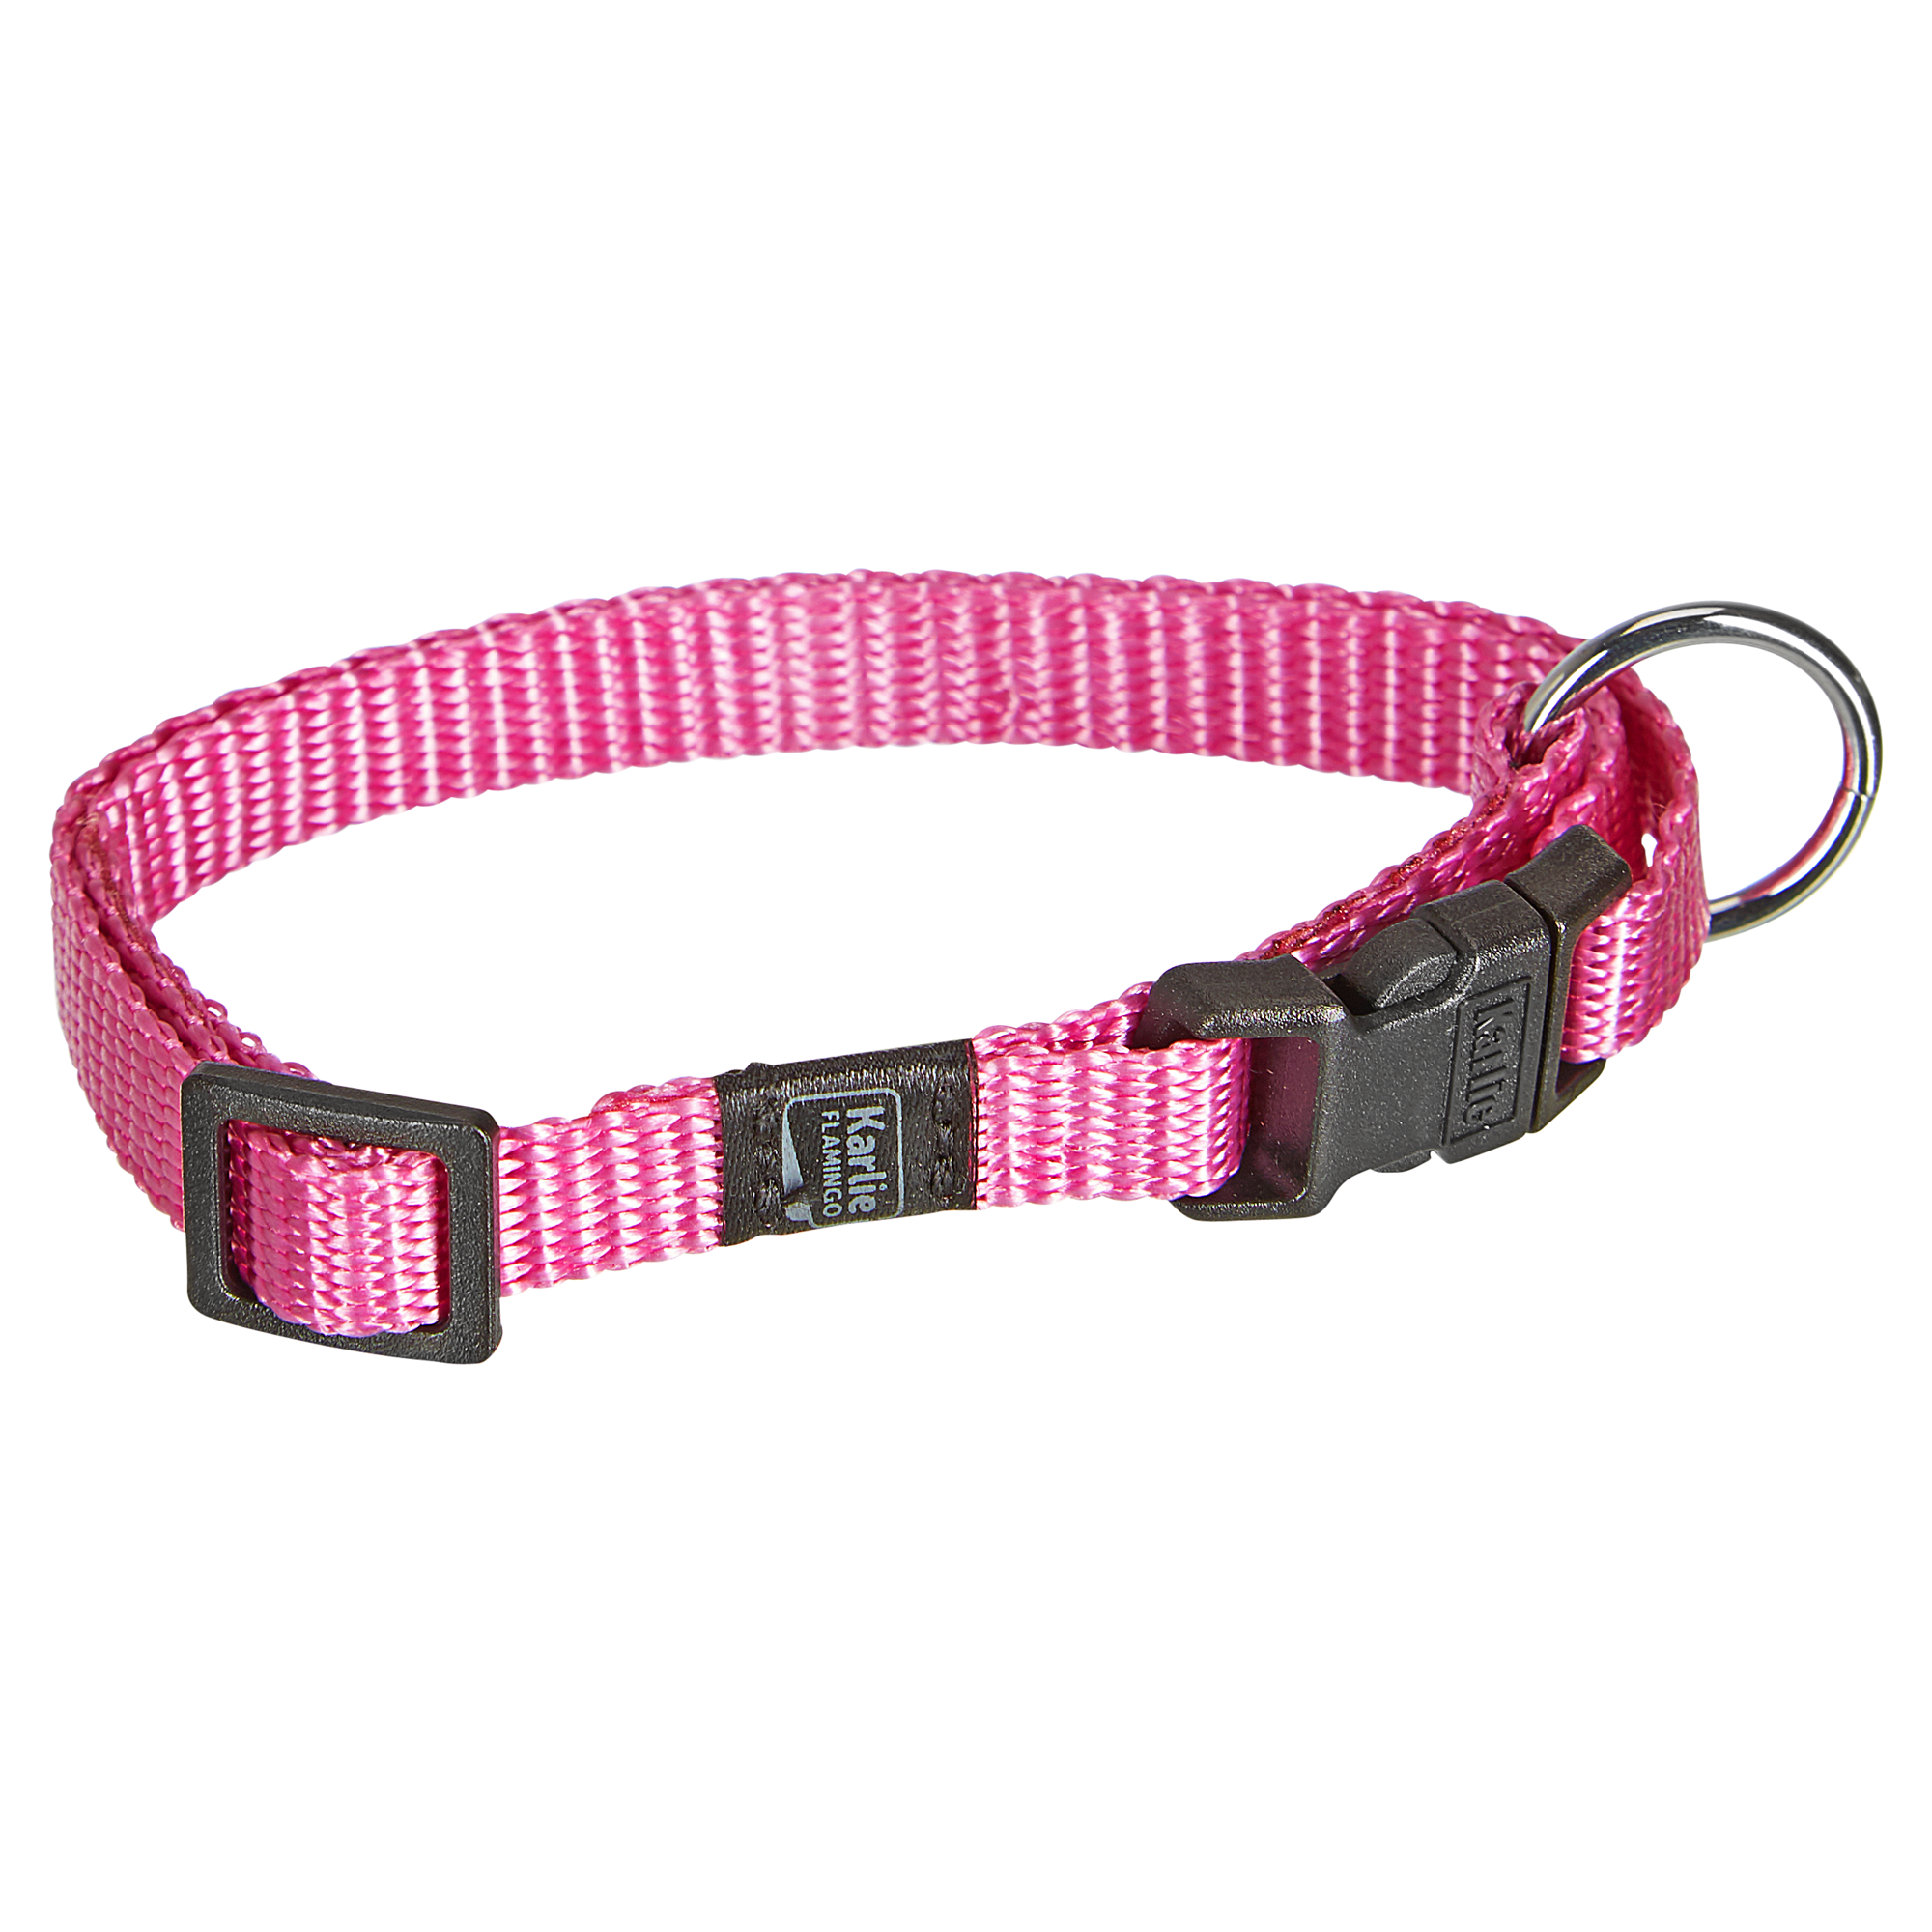 Hundehalsband "Art Sportiv Plus" rosa Gr. XS + product picture